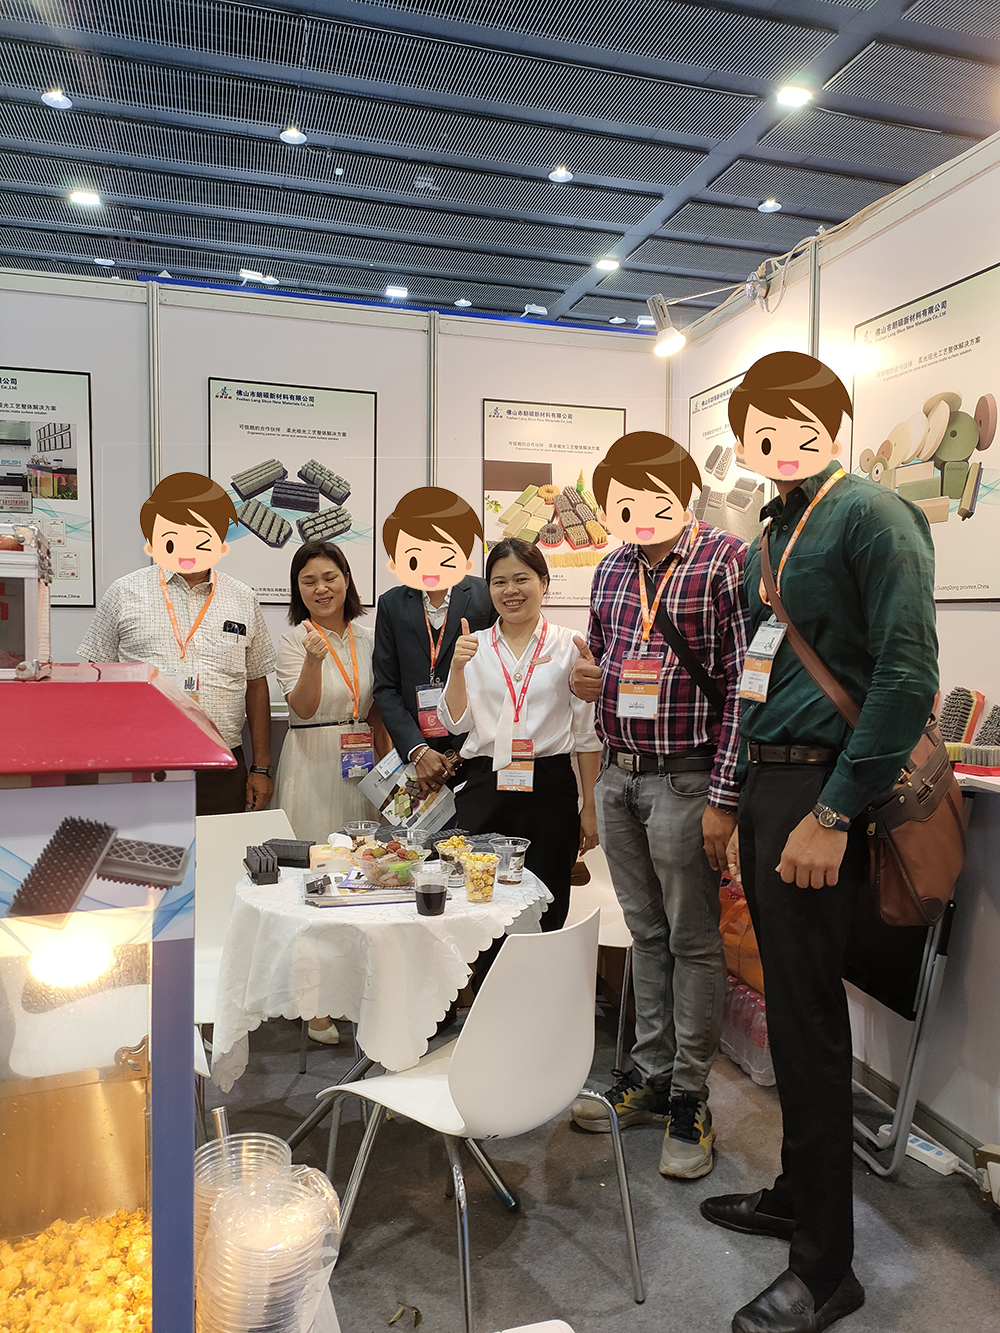 Foshan Langshuo New Materials Co., Ltd Makes a Mark at the 37th Canton Ceramics Exhibition